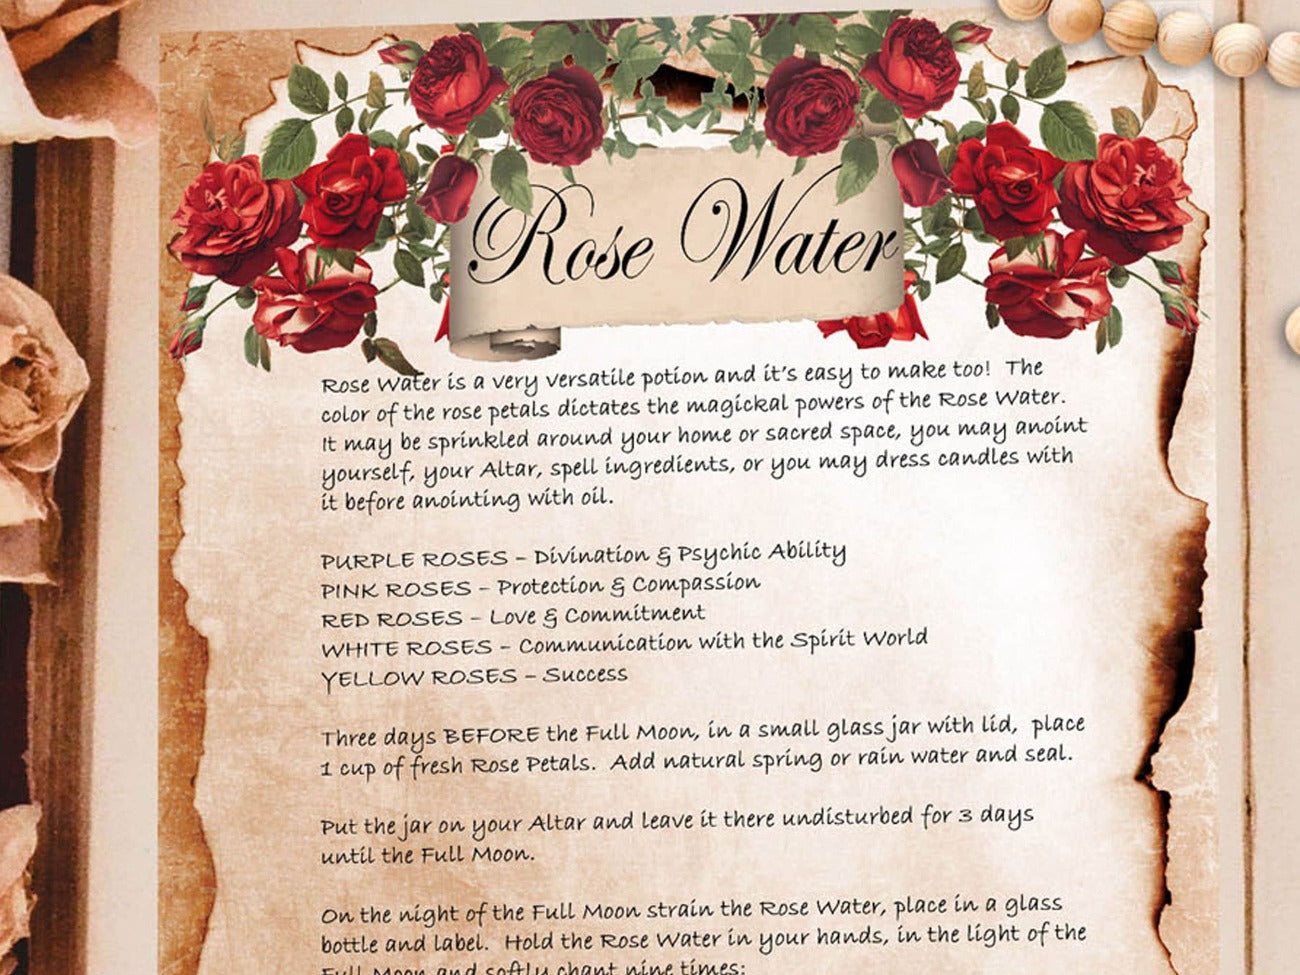 ROSE WATER POTION, Charmed Style Potion Spell, Homemade Rose Water, Beauty Spell, Briar Rose Potion, Witch Witchcraft Magic Love Recipe - Morgana Magick Spell